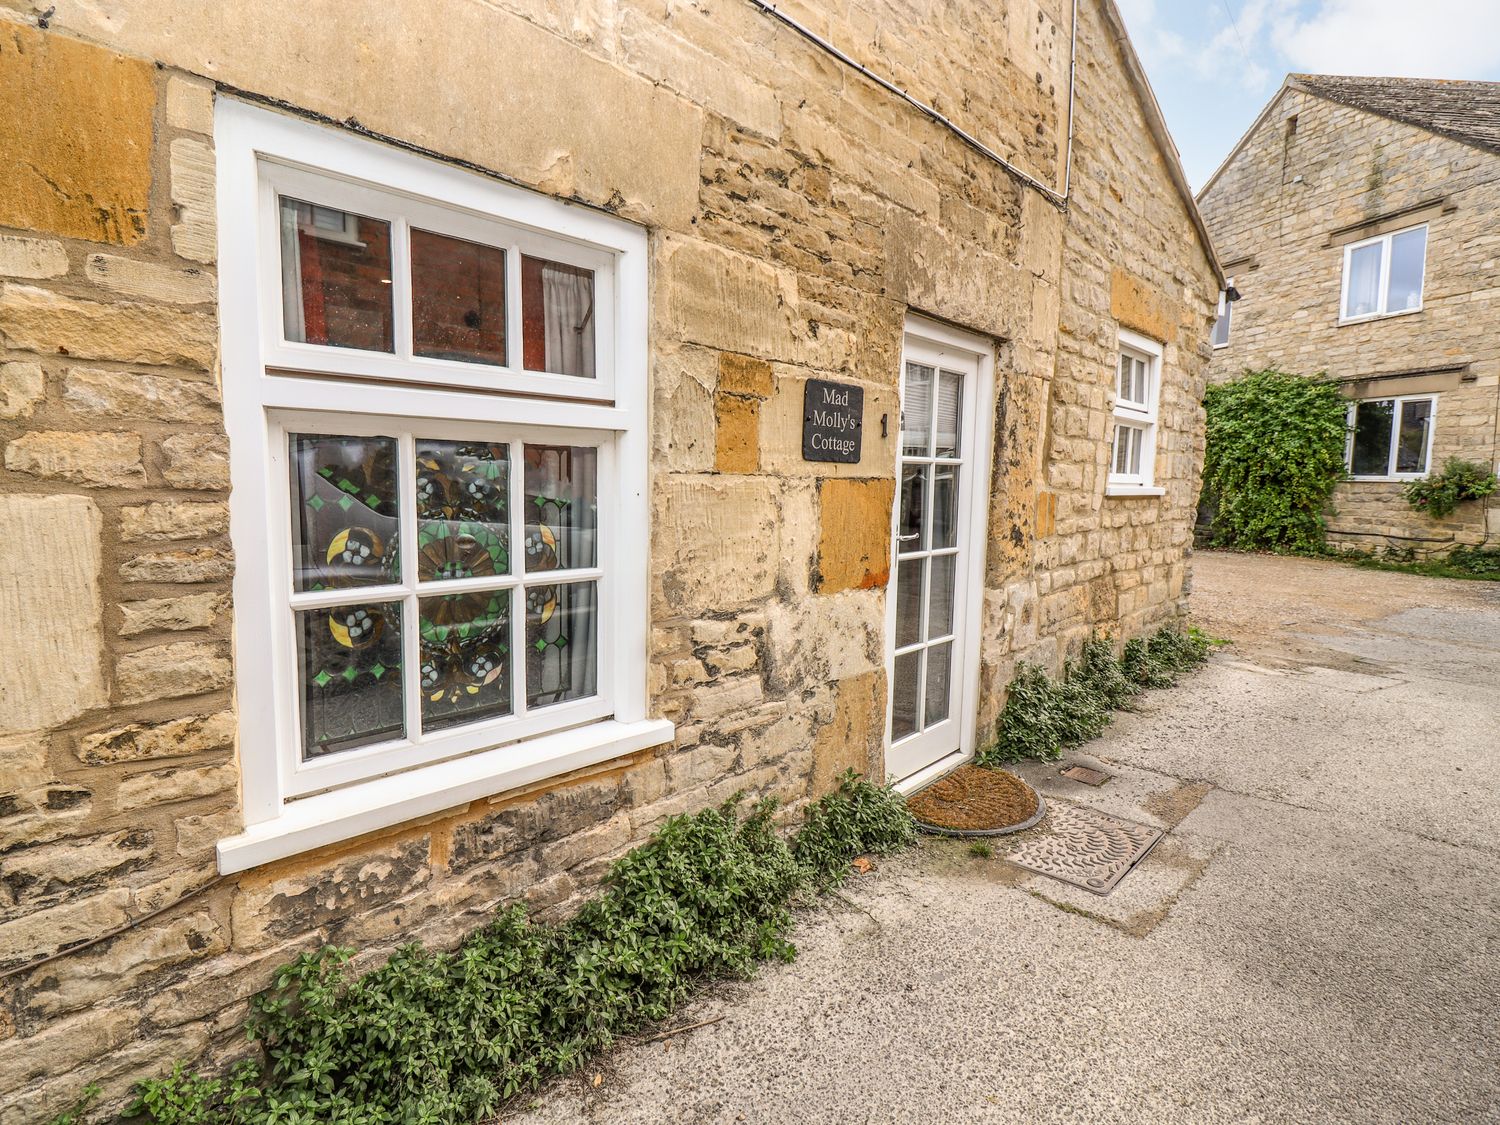 Mad Molly's Cottage - Cotswolds - 988596 - photo 1